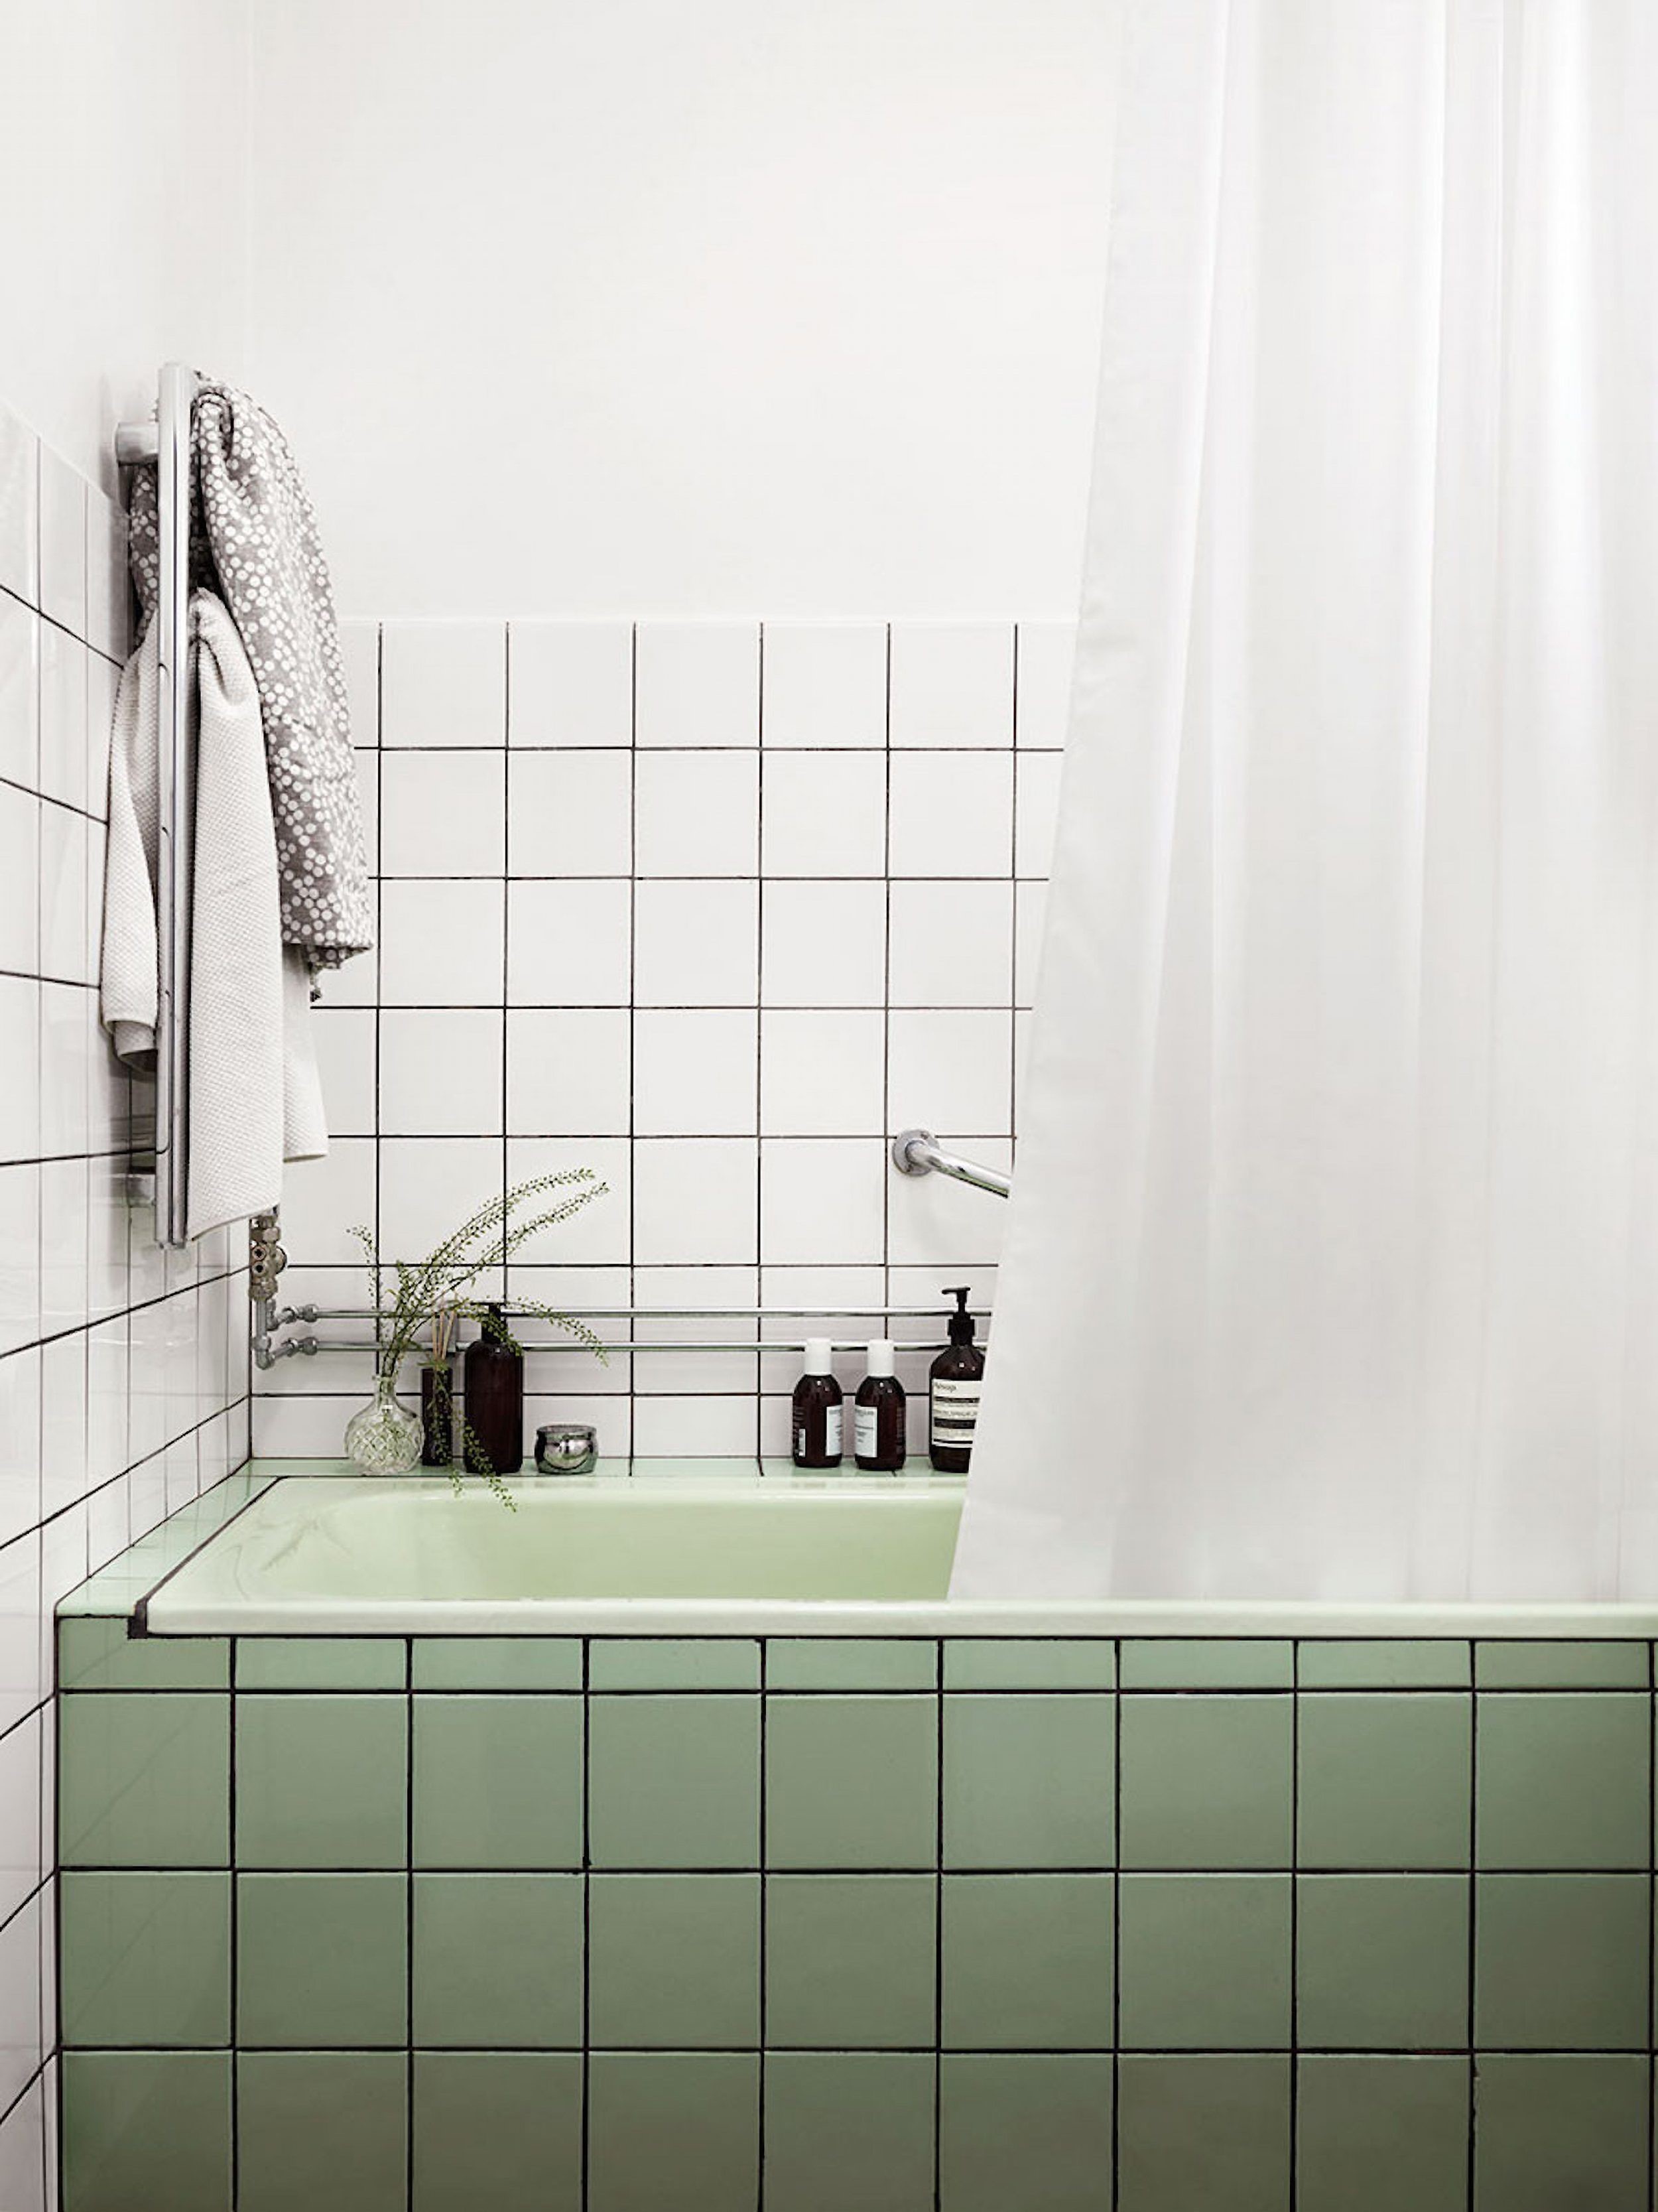 Close up lifestyle image of an avacado tiled bath contrast against white tiled walls